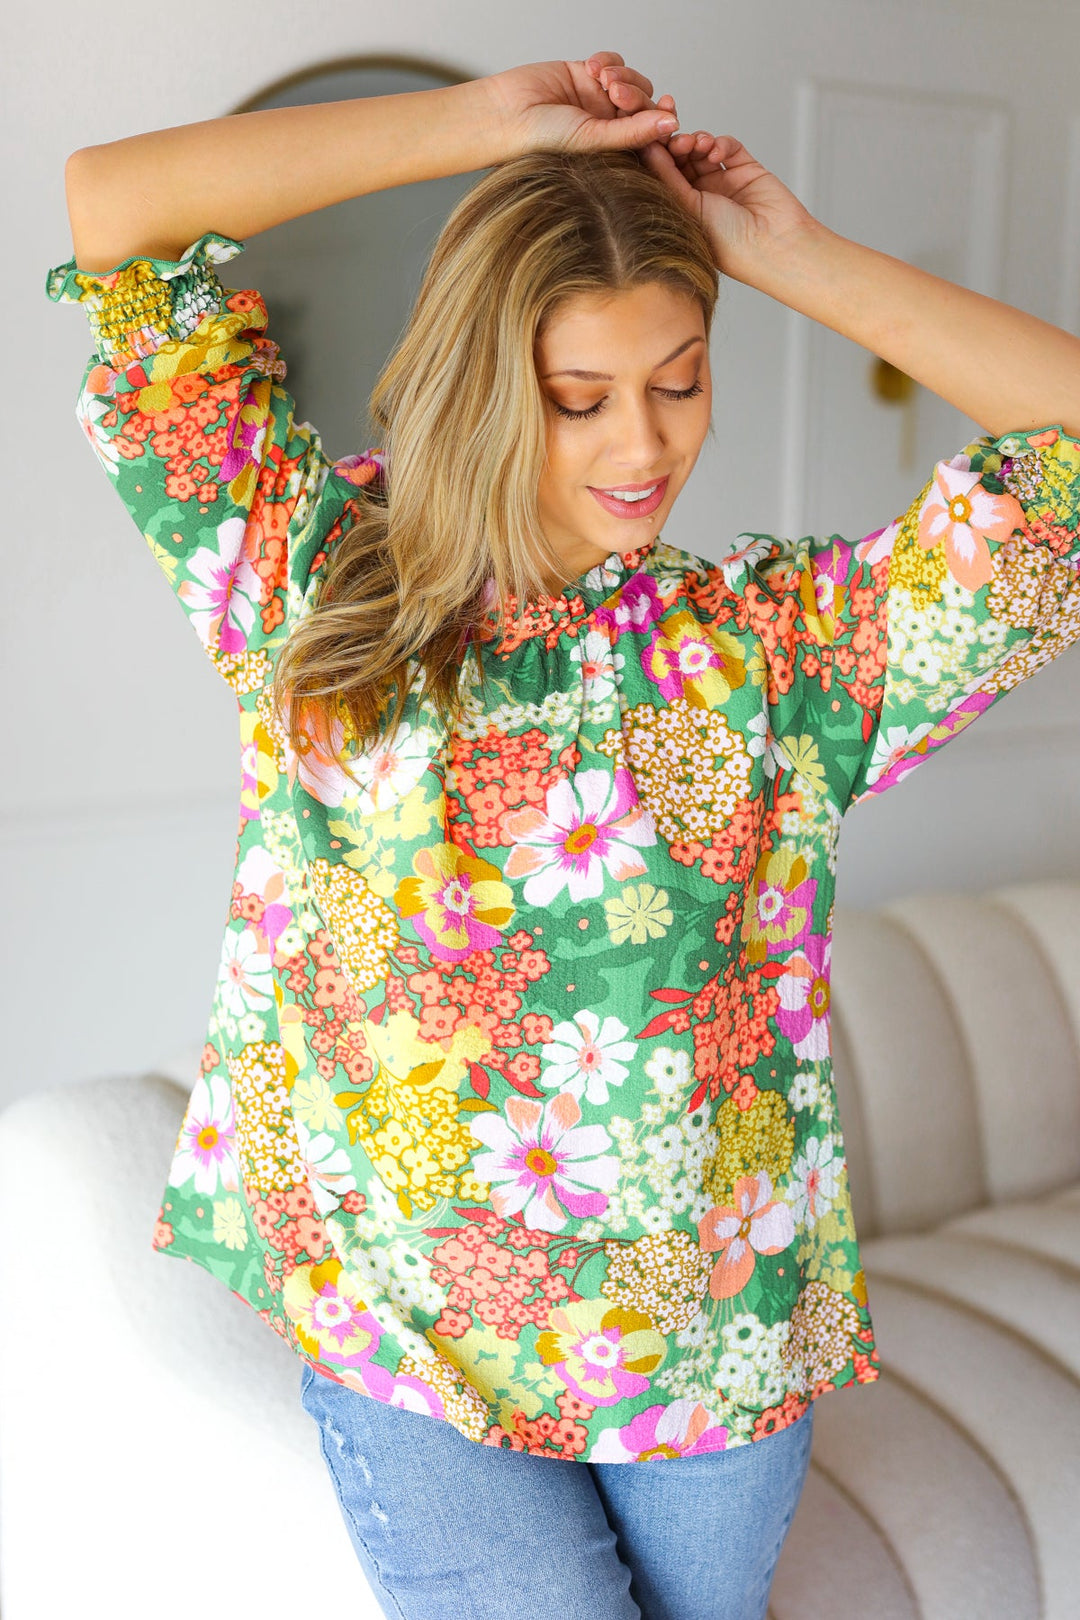 Brace Yourself - Floral Smocked Top